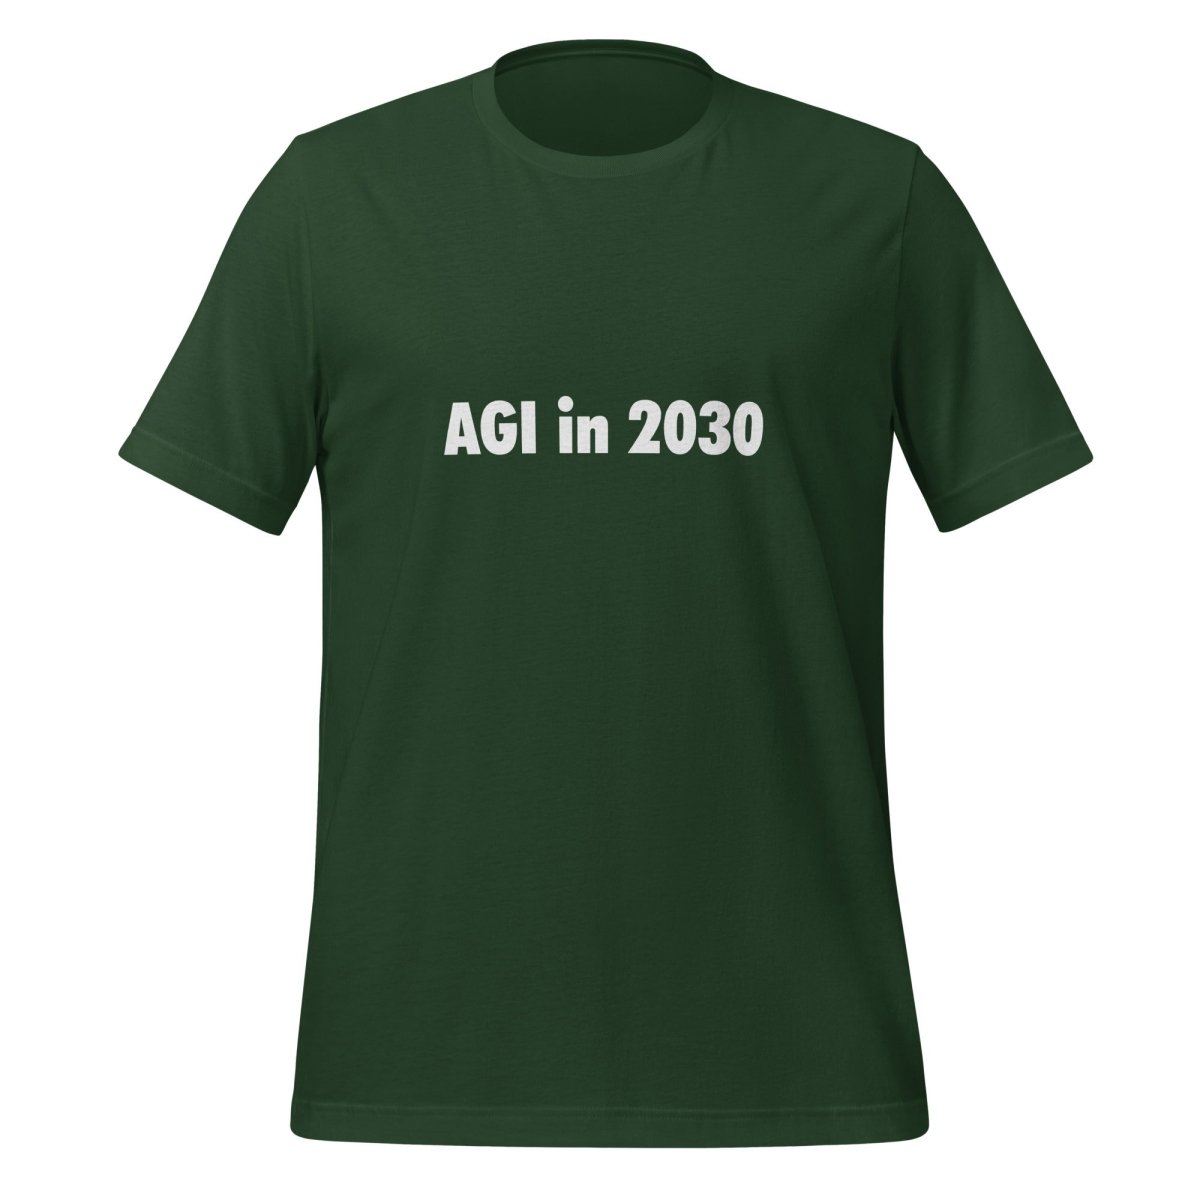 AGI in 2030 T - Shirt (unisex) - Forest - AI Store